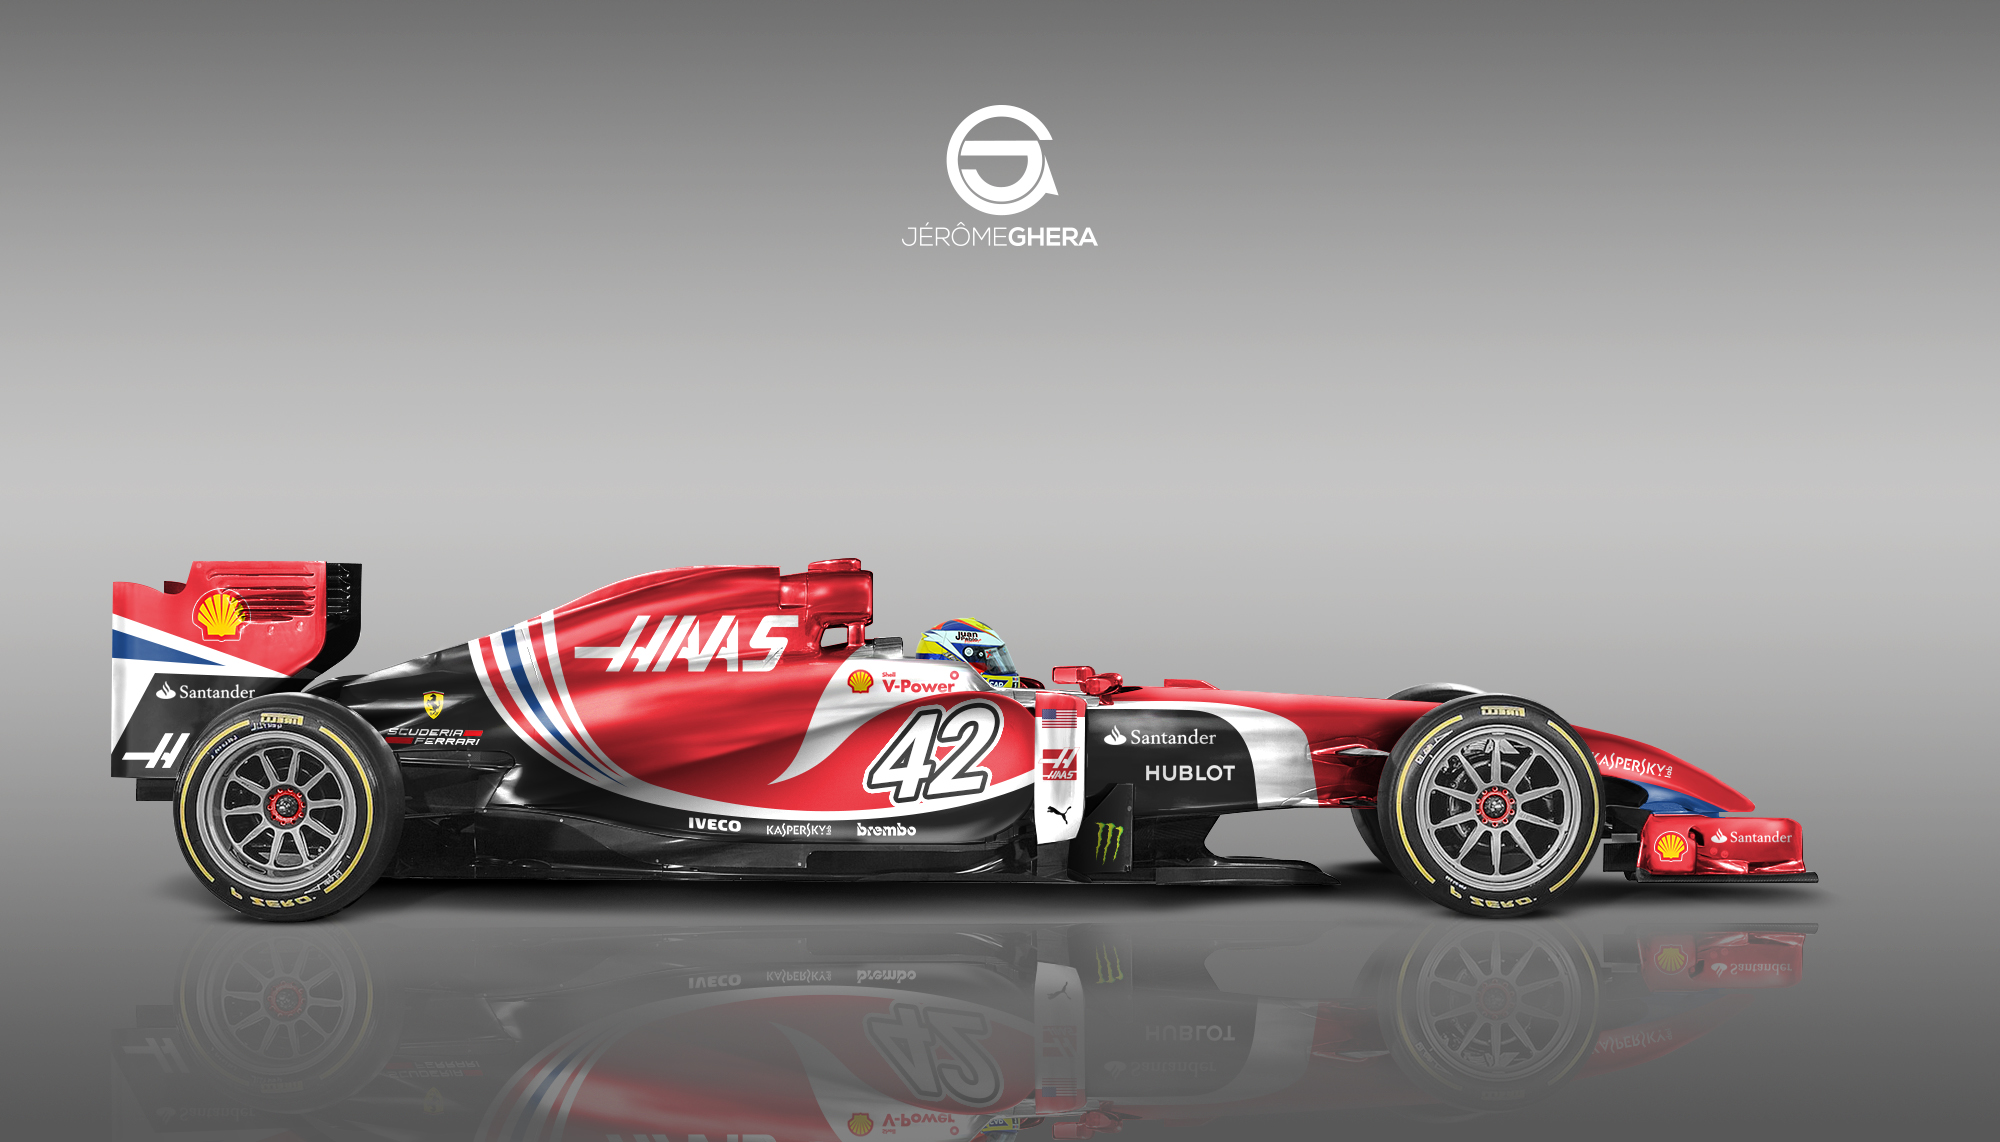 download haas f1 2016 for free